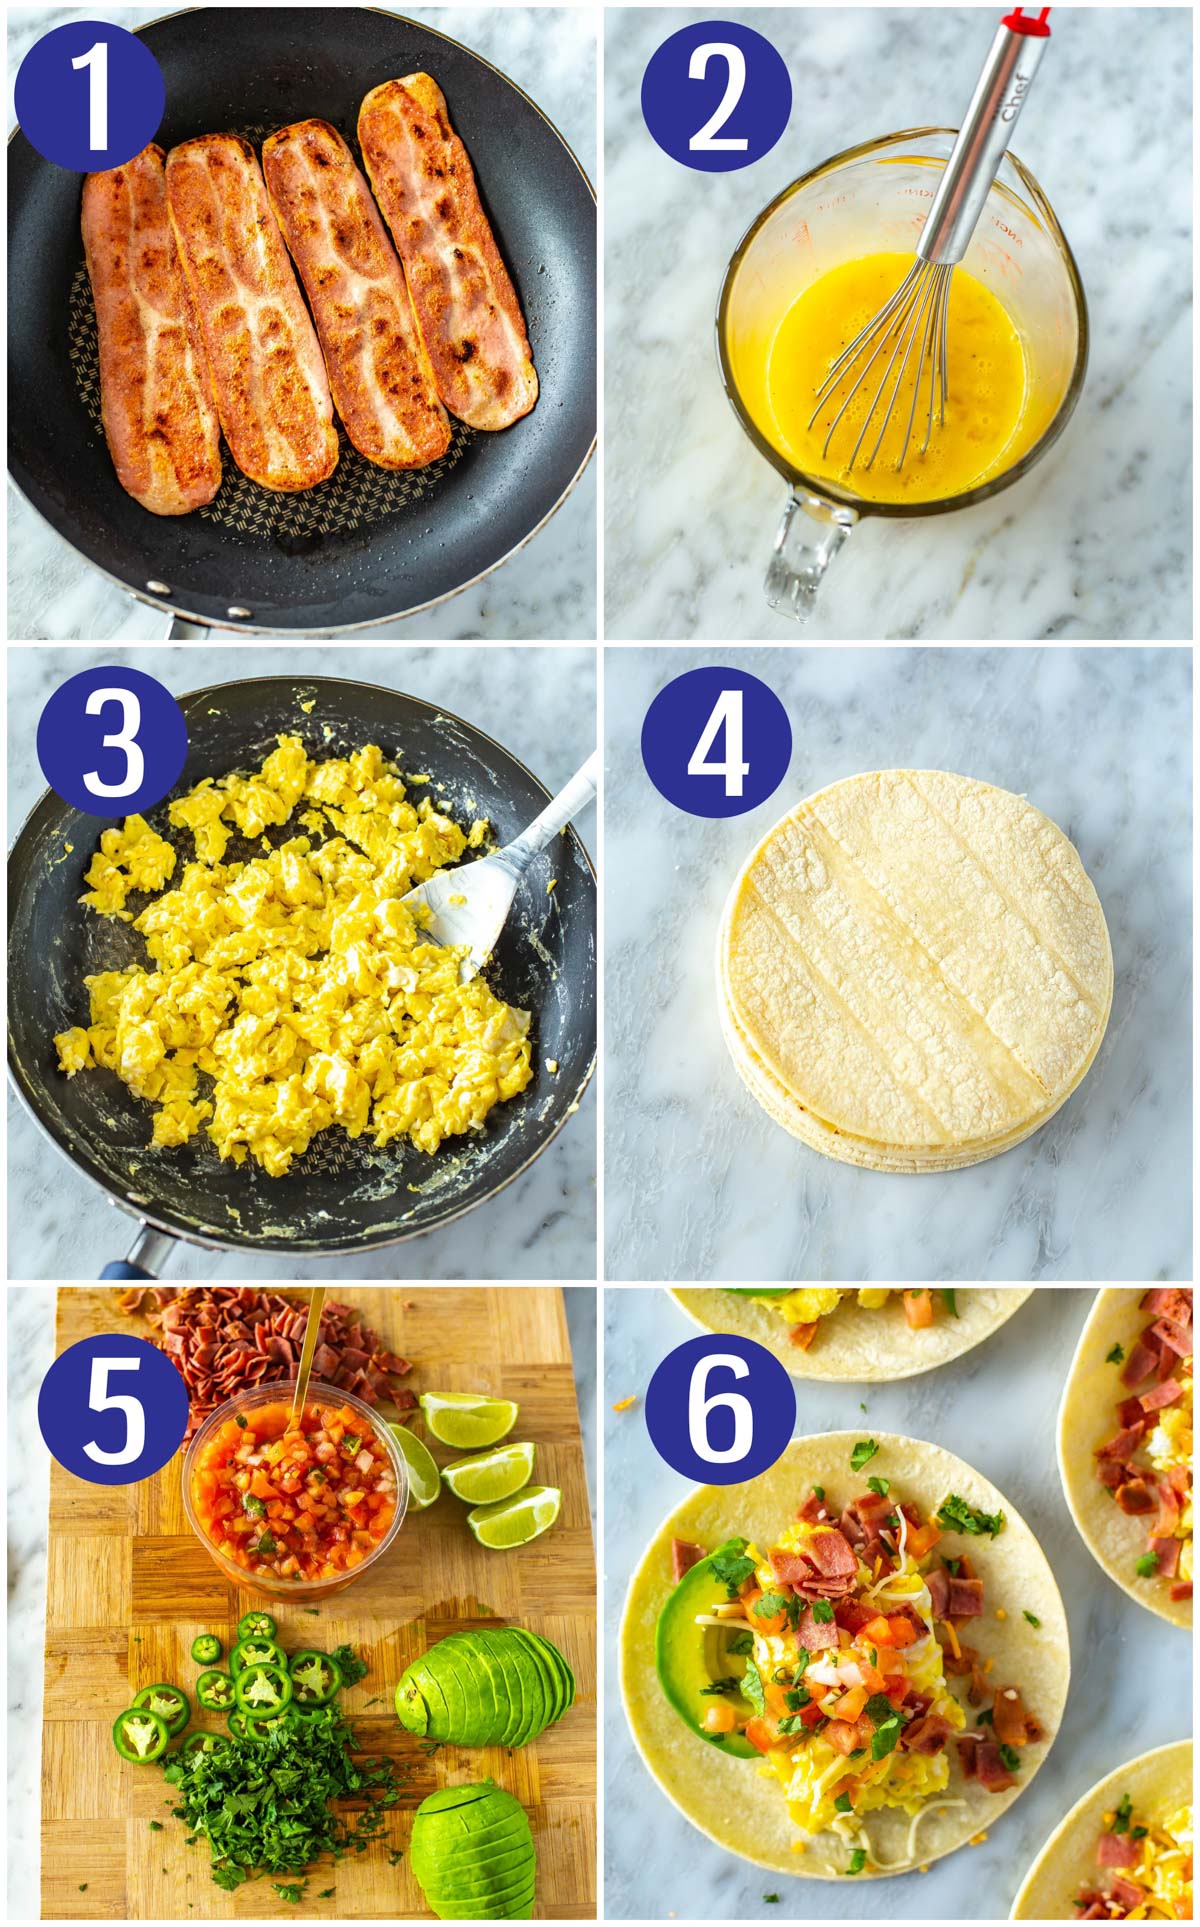 Step-by-step instructions for making breakfast tacos: cook bacon, mix eggs, scramble eggs, warm tortillas, prepare toppings, and assemble tacos.